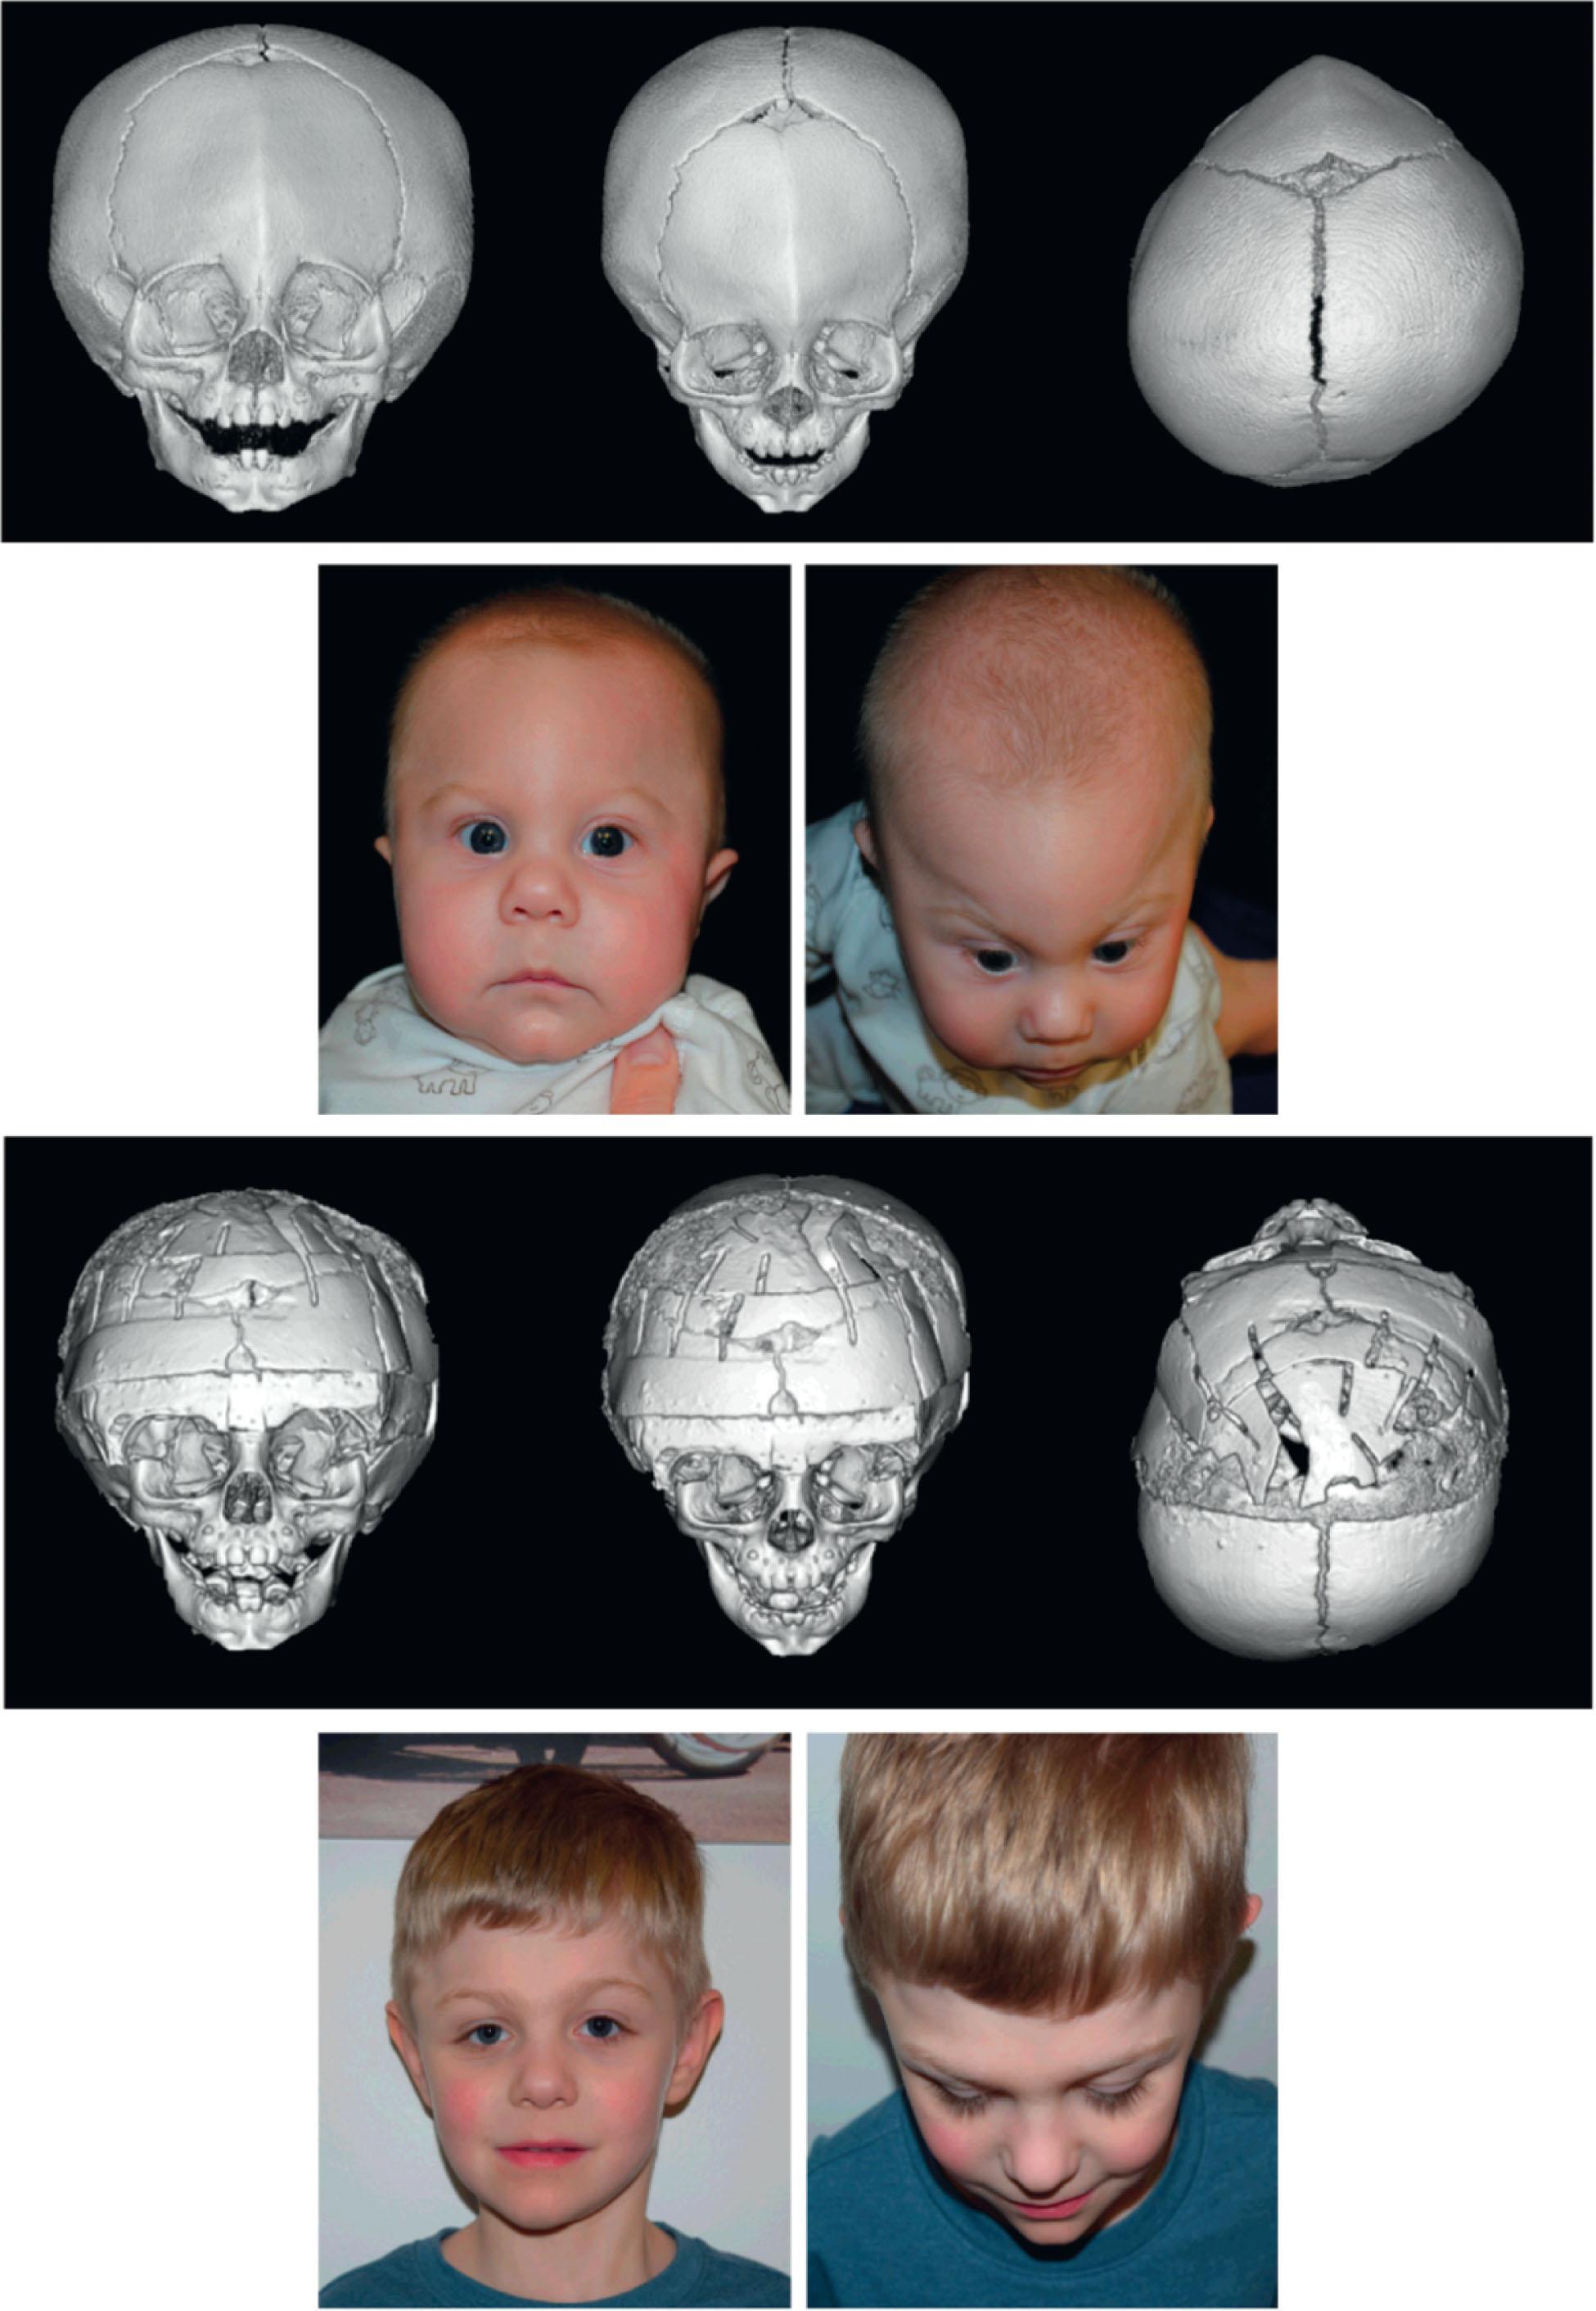 Figure 25.2.2, Bifrontal orbital advancement and remodeling in severe trigonocephaly. 5-month-old male presenting with imaging confirmed metopic craniosynostosis with sutural ridging, upsloping superior orbital rims, orbital narrowing, and interorbital narrowing ( panel 1 ). On bird’s eye view, he demonstrates severe trigonocephaly with hypotelorism ( panel 2 ). He underwent BFOAR at 9 months with a reinforced, interpositional bone graft to the central bandeau to expand the outer orbital distance to ~90 mm in an overcorrected position ( panel 3 ). Several years later, he demonstrates a more normalized forehead contour with slight orbital asymmetry ( panel 4 ).